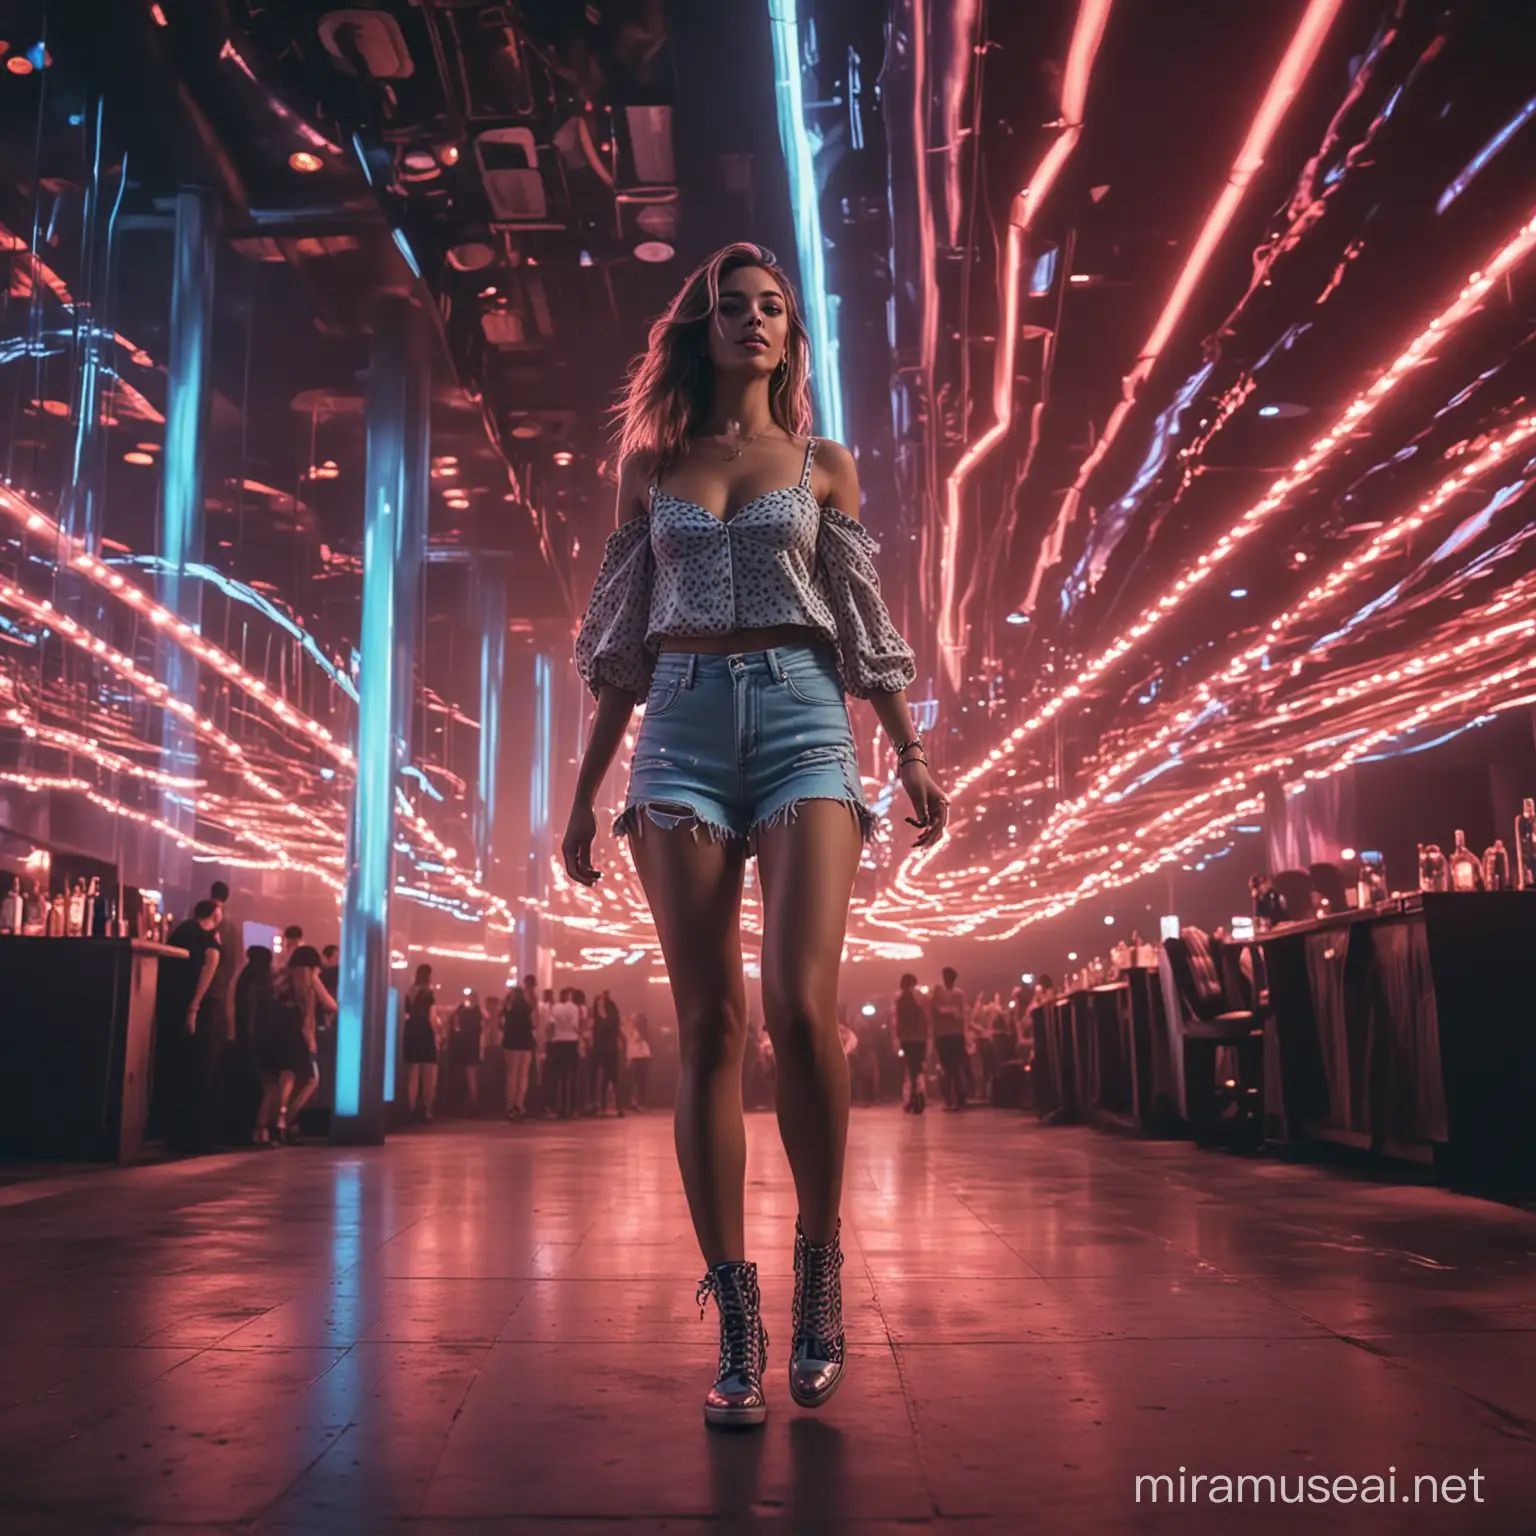 groovy and beautiful girl walking by at a high scale nightclub